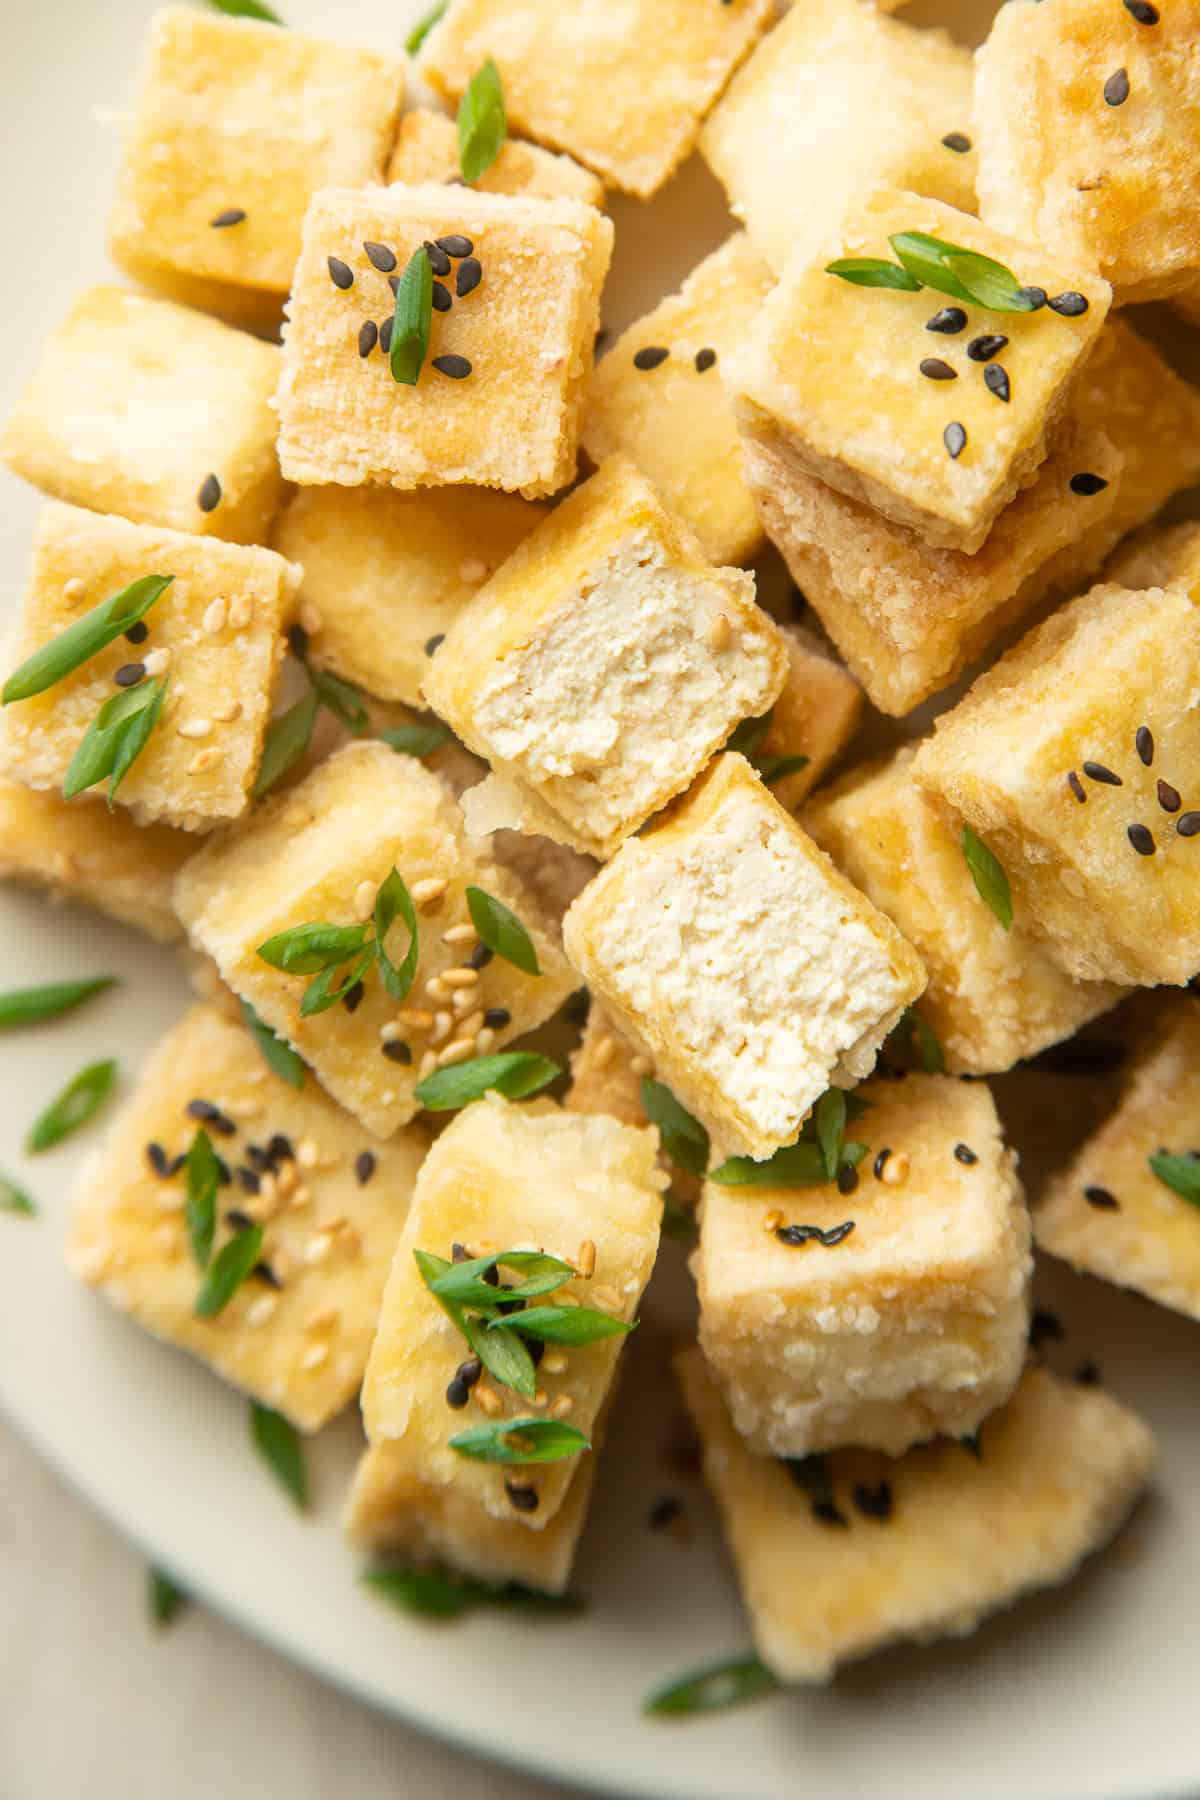 Plate of Fried Tofu cubes with one of them cut in half.